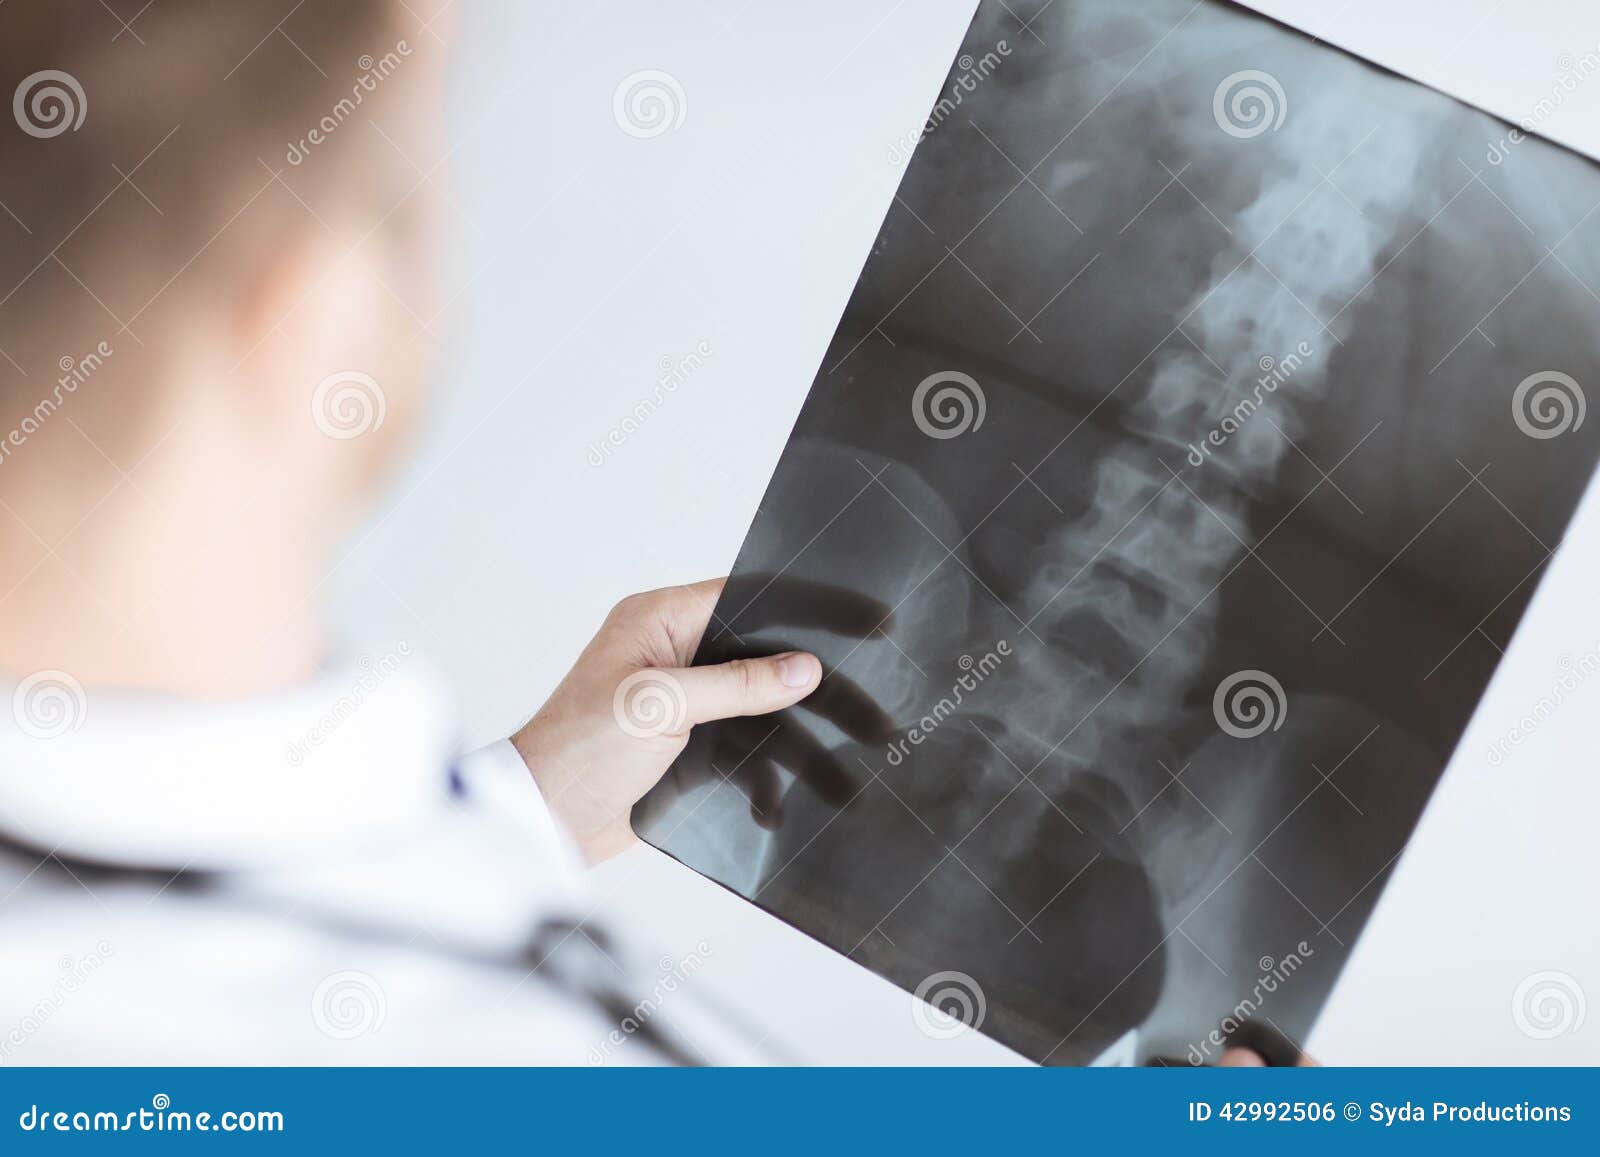 doctor holding x-ray or roentgen image